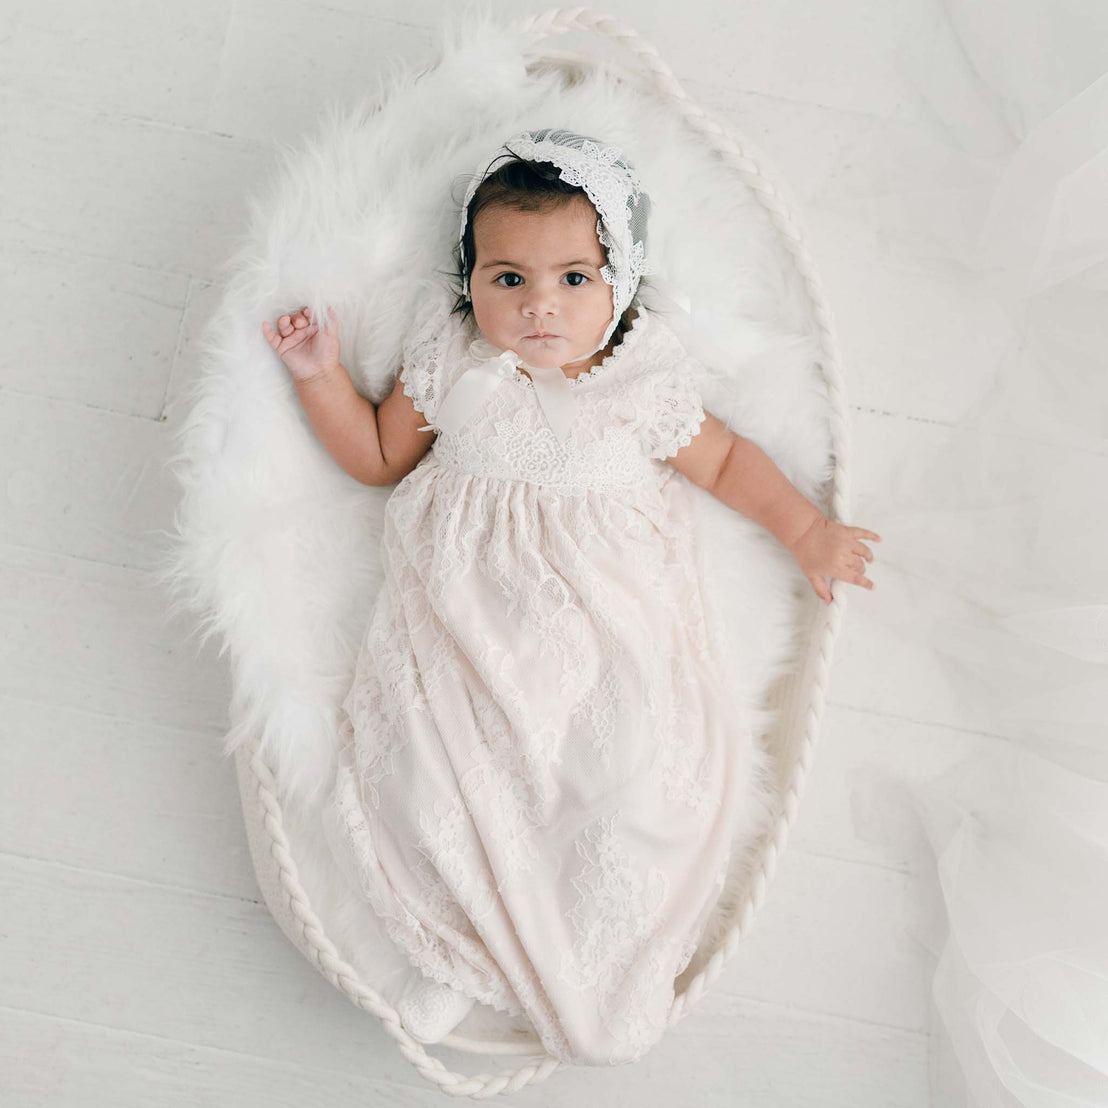 A baby wearing a Juliette Layette gown and headband lies in a handcrafted wicker basket adorned with white fur, looking directly at the camera with wide eyes.